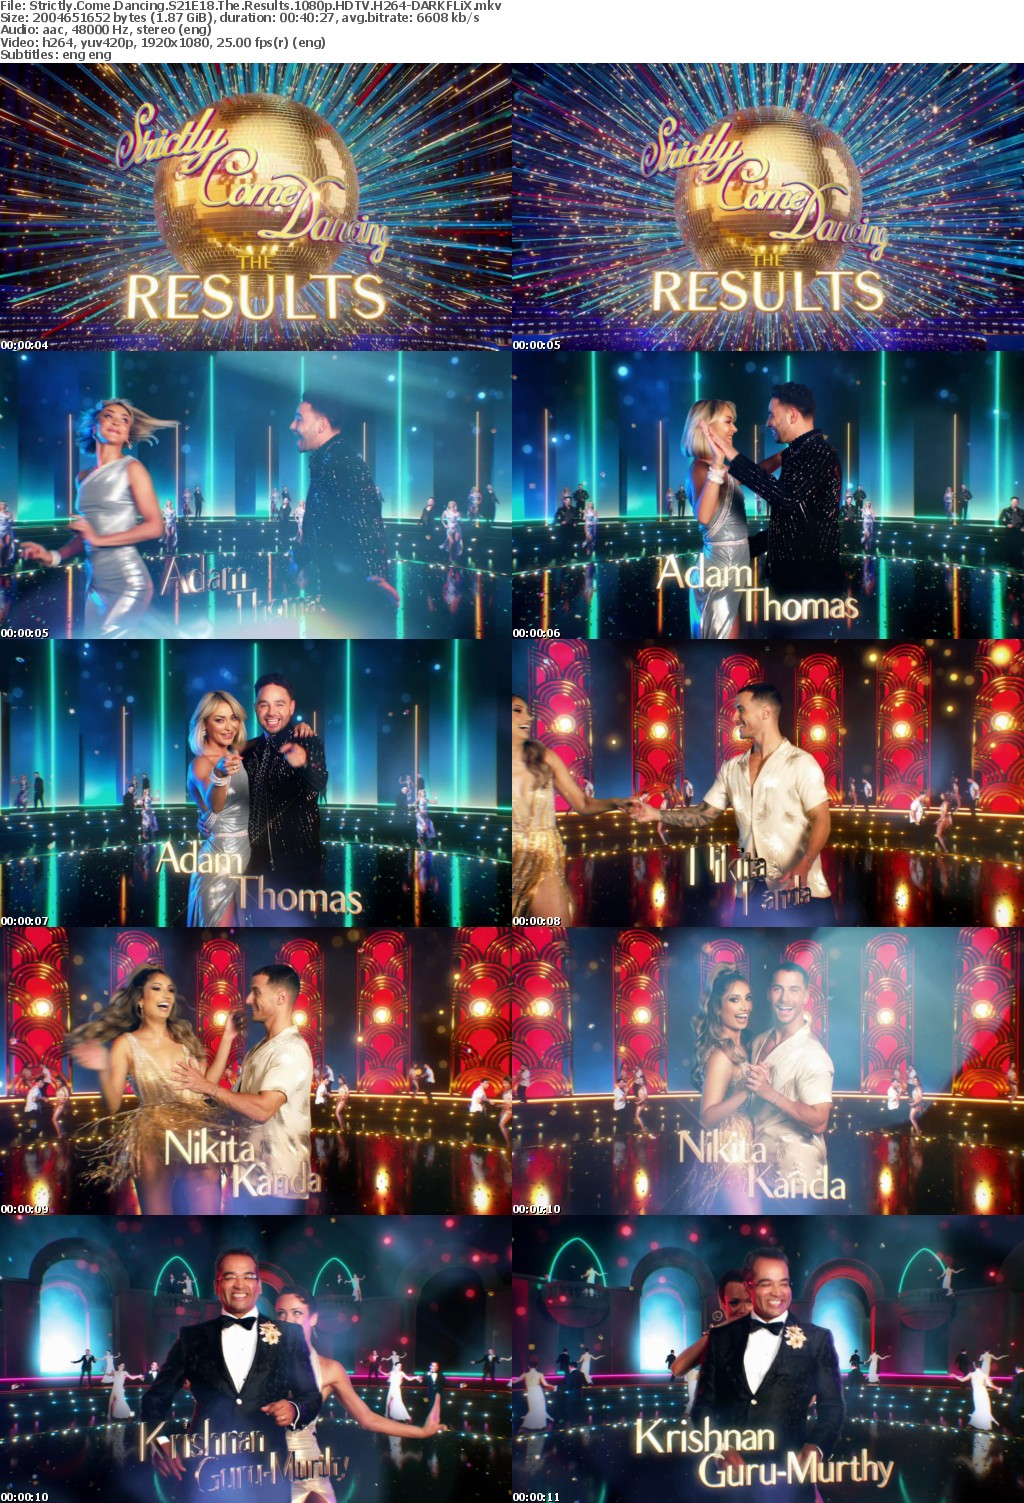 Strictly Come Dancing S21E18 The Results 1080p HDTV H264-DARKFLiX